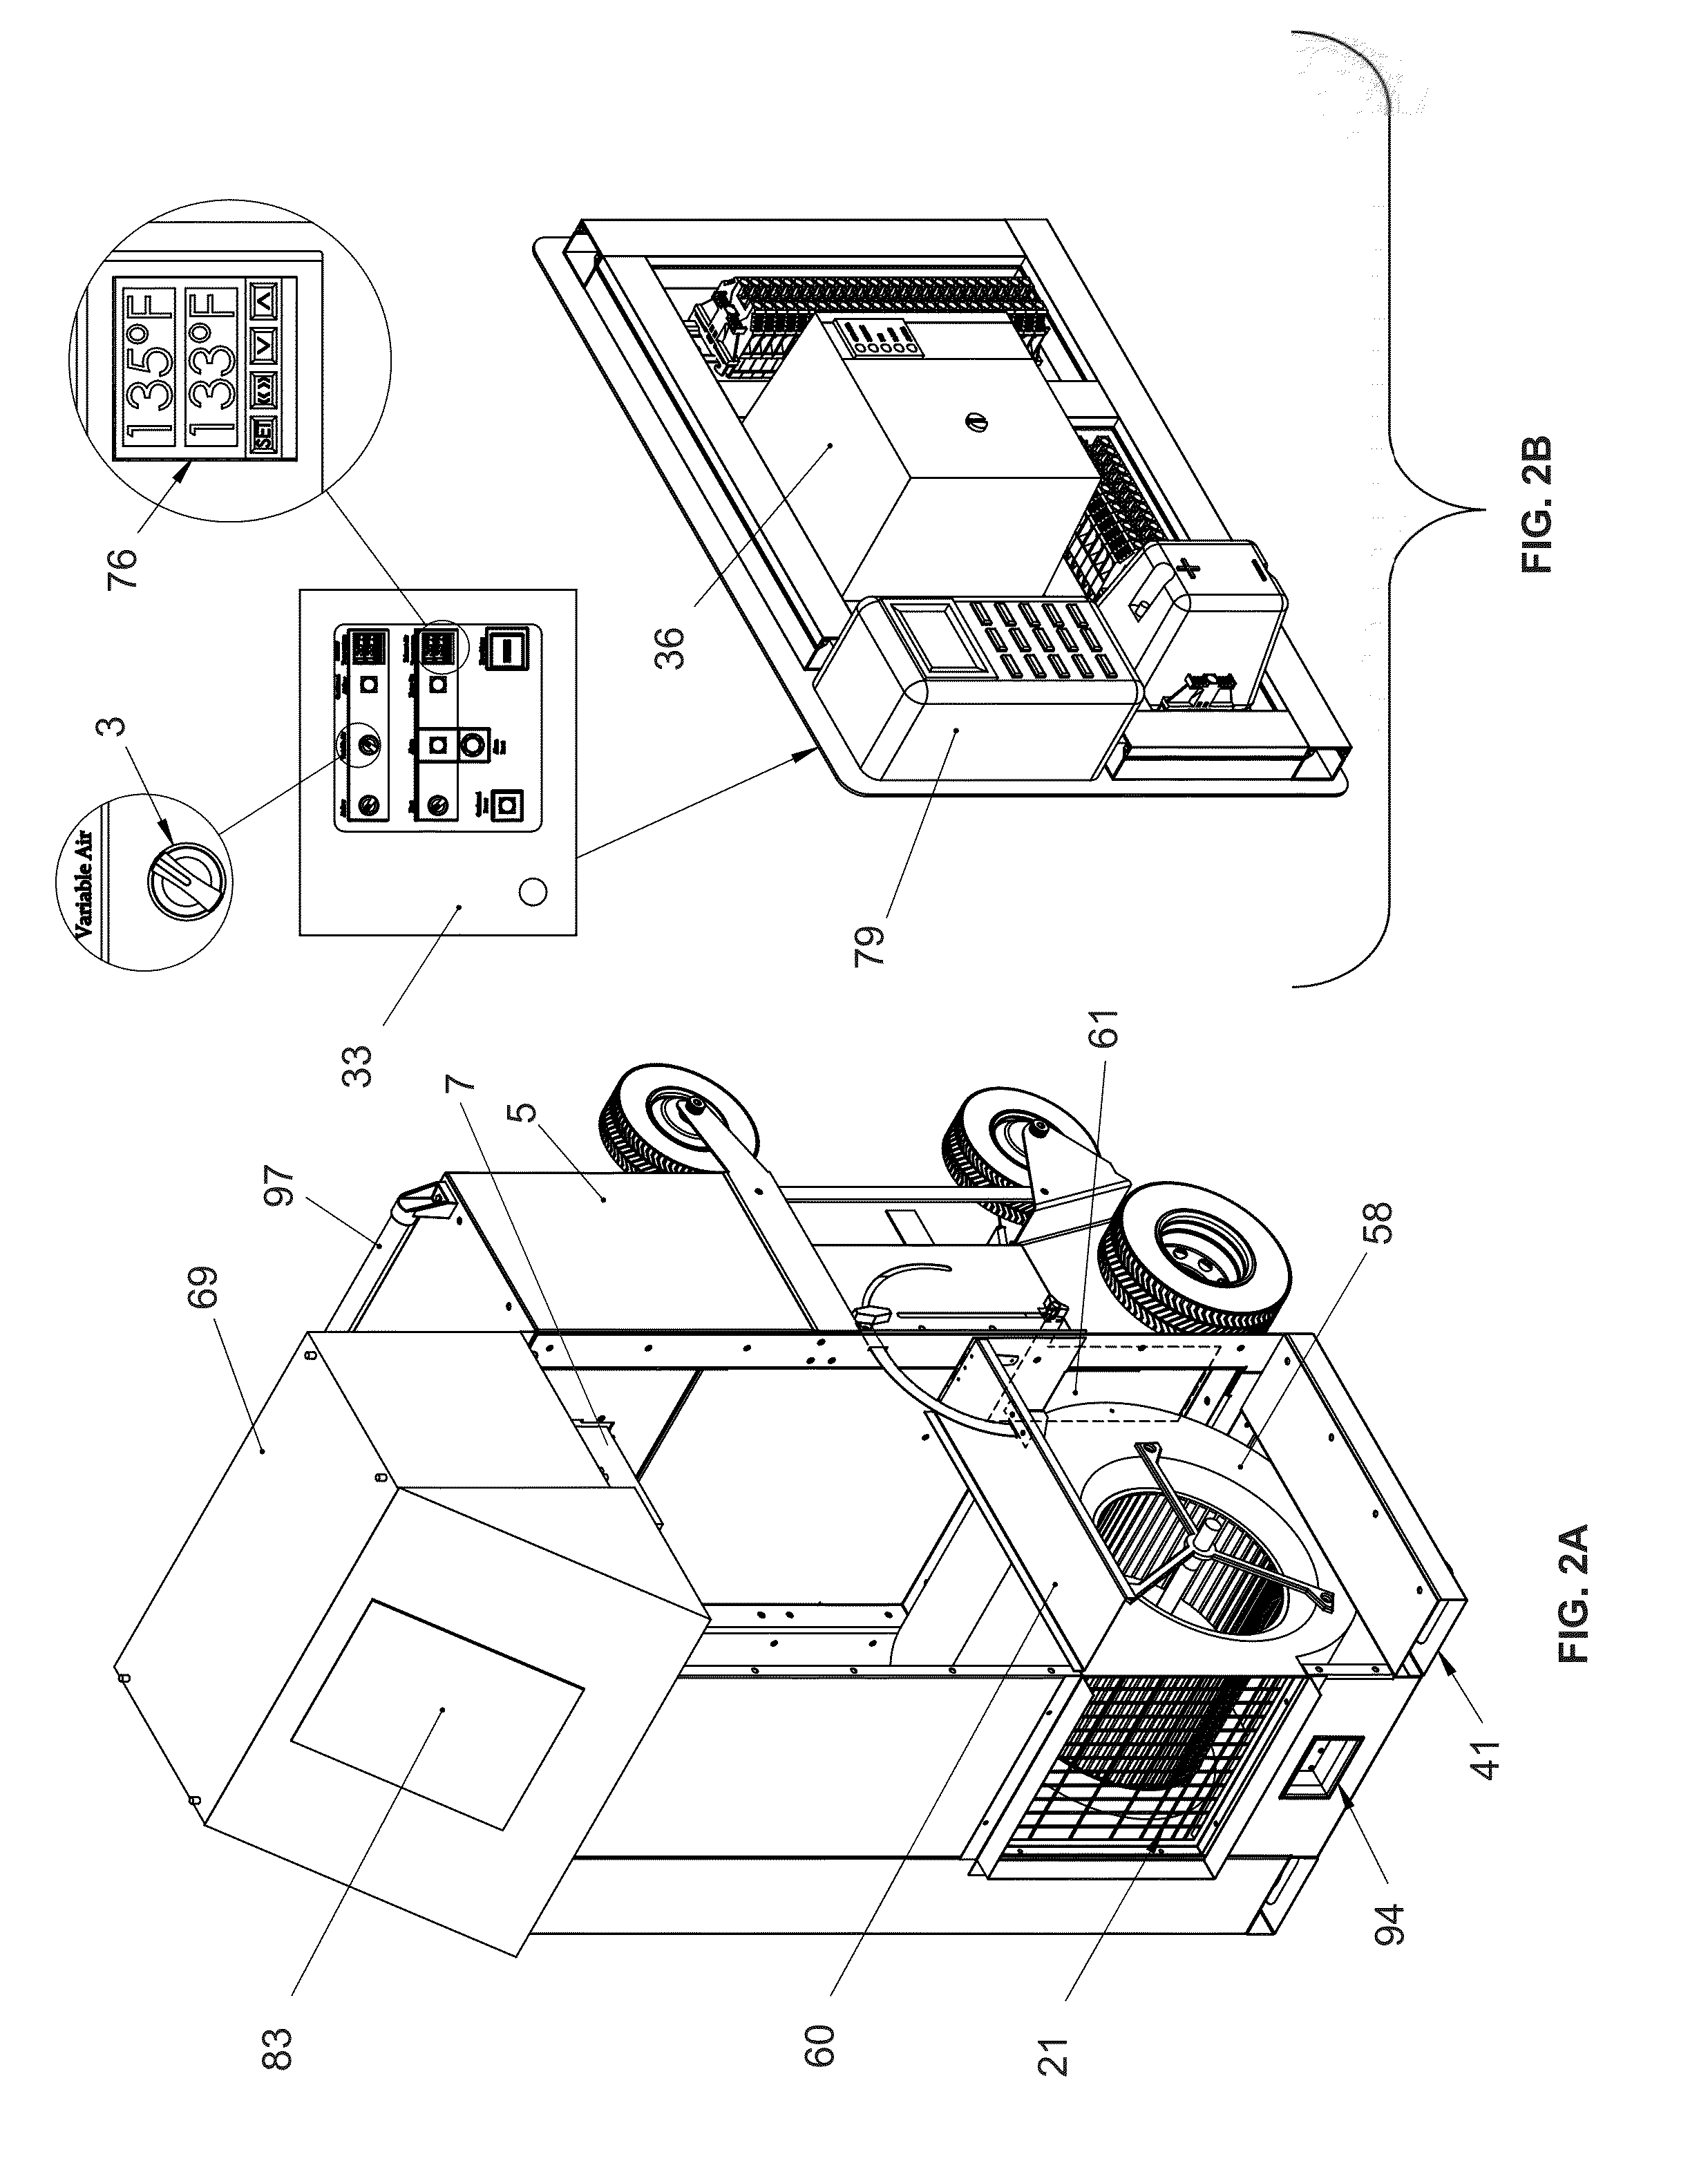 Multi-component system for treating enclosed environments